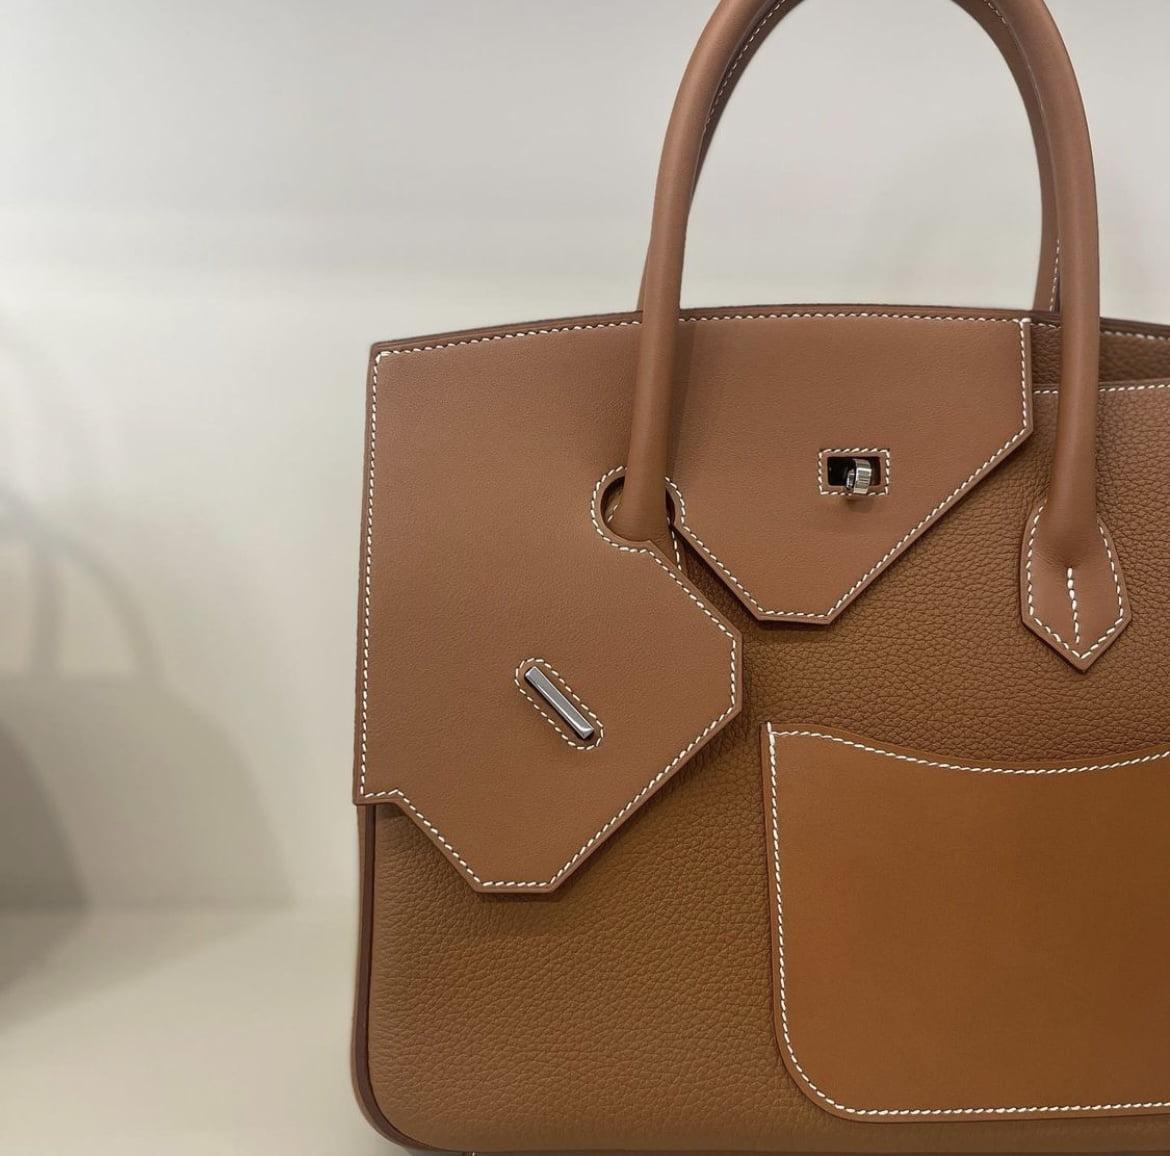 The HOTTEST Upcoming HERMES BAGS - New Hermès Birkin and New Kelly Bags  from fall - winter 2022 